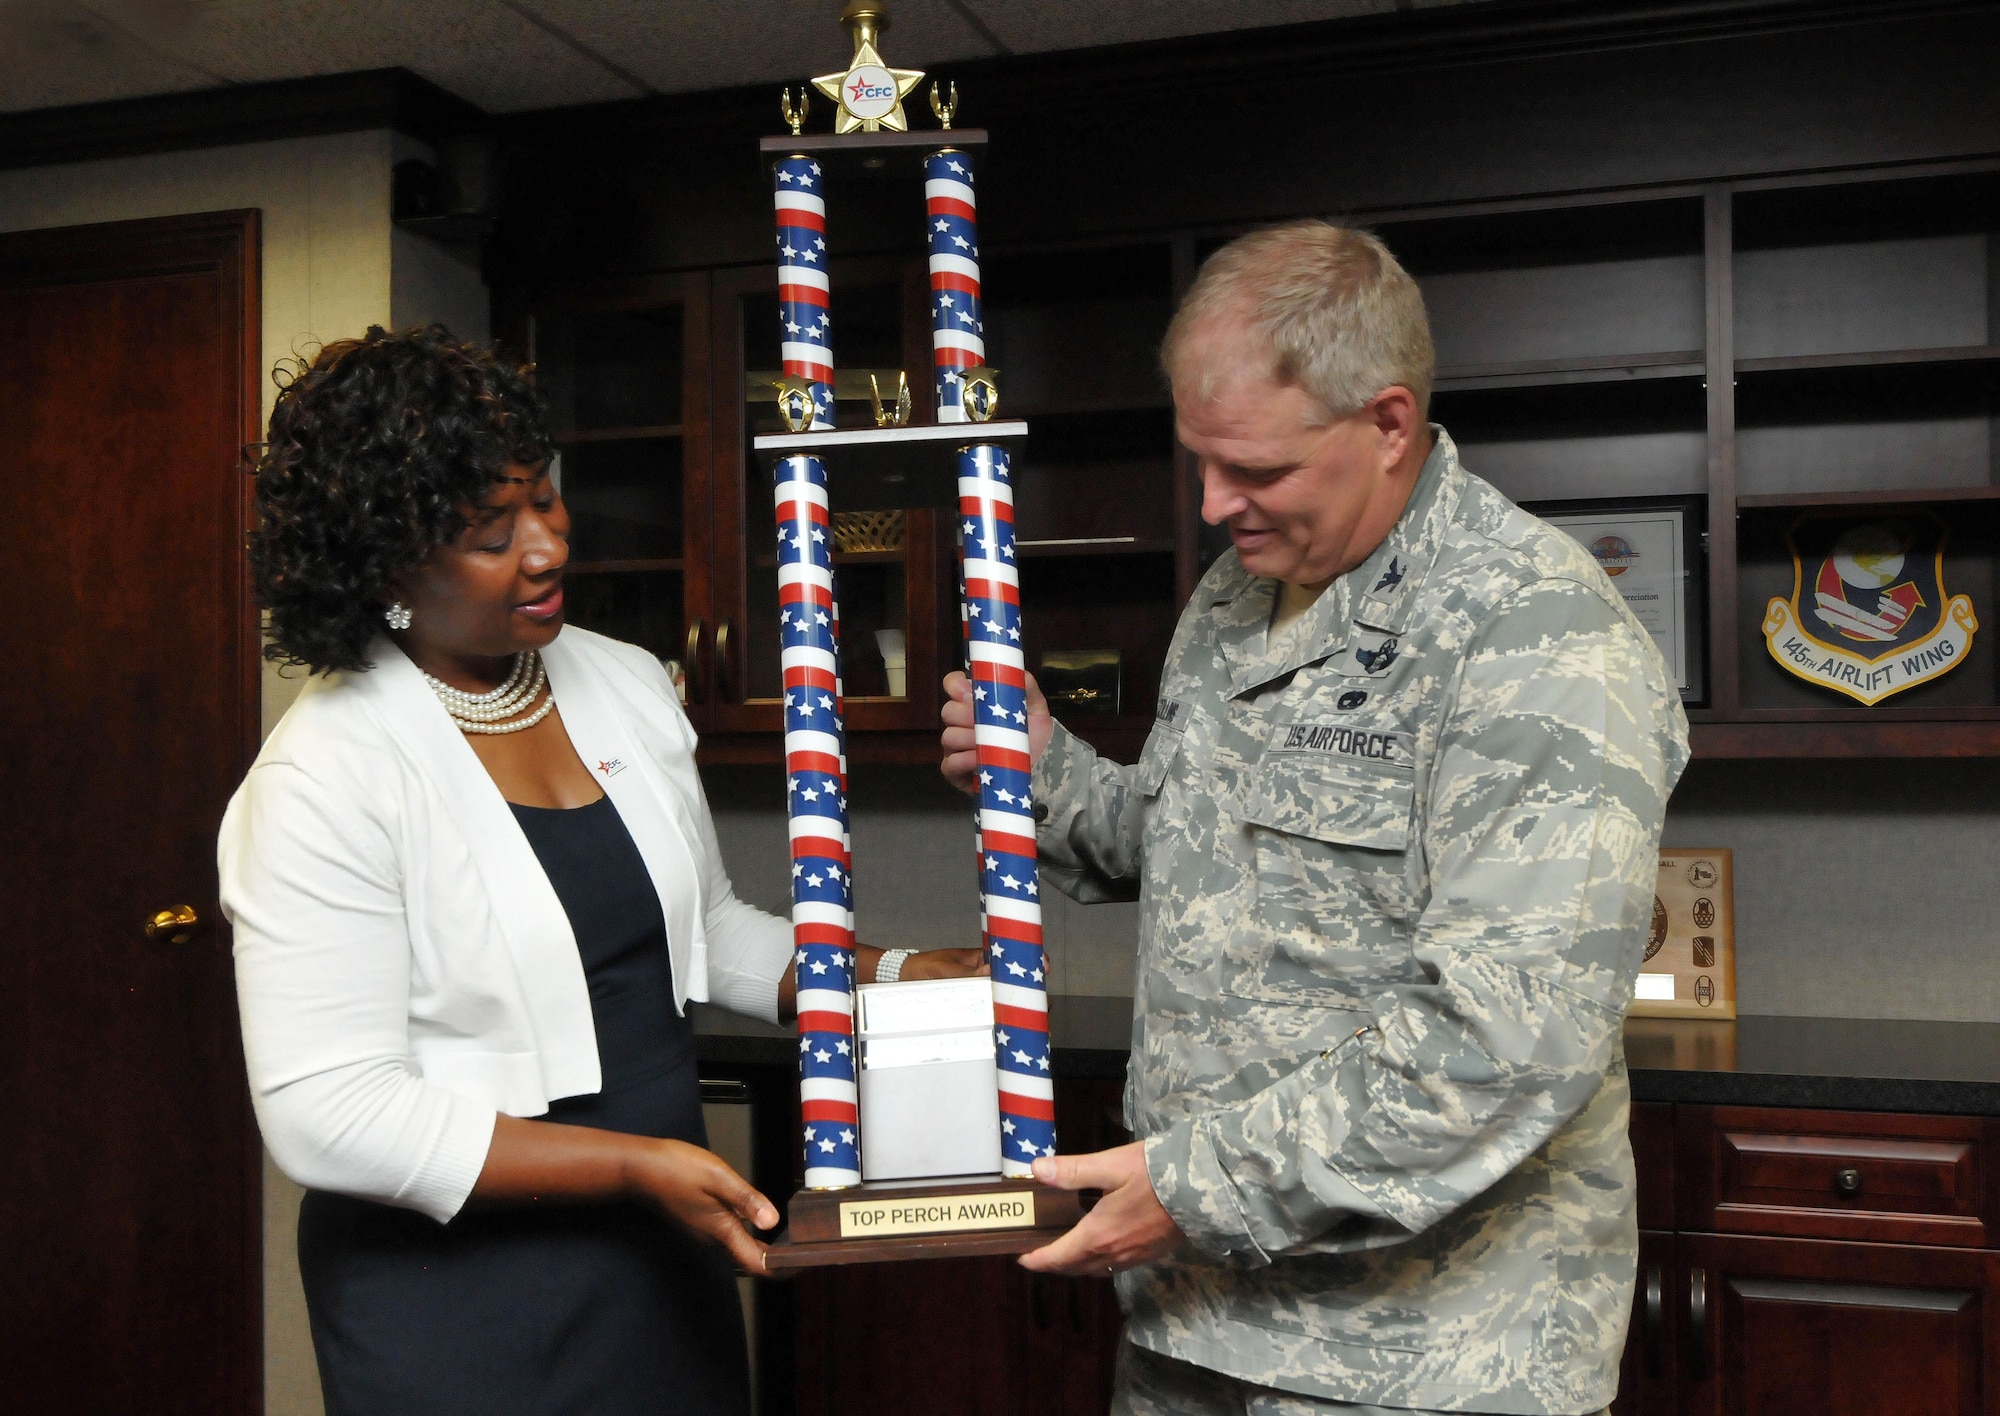 U.S. Air Force Col. Marshall C. Collins, commander, 145th Airlift Wing and retired Lt. Col. Rose Dunlap, representative for the Combined Federal Campaign (CFC), proudly display the 2013 Greater North Carolina CFC American Eagle “Top Perch” award. Collins accepted on behave of all military members and federal employees of the North Carolina Air National Guard that so generously contributed to local, national and international charities. The presentation was held at the North Carolina Air National Guard base, Charlotte Douglas Intl. Airport, June 17, 2014. (U.S. Air National Guard photo by Master Sgt. Patricia F. Moran, 145th Public Affairs/Released)